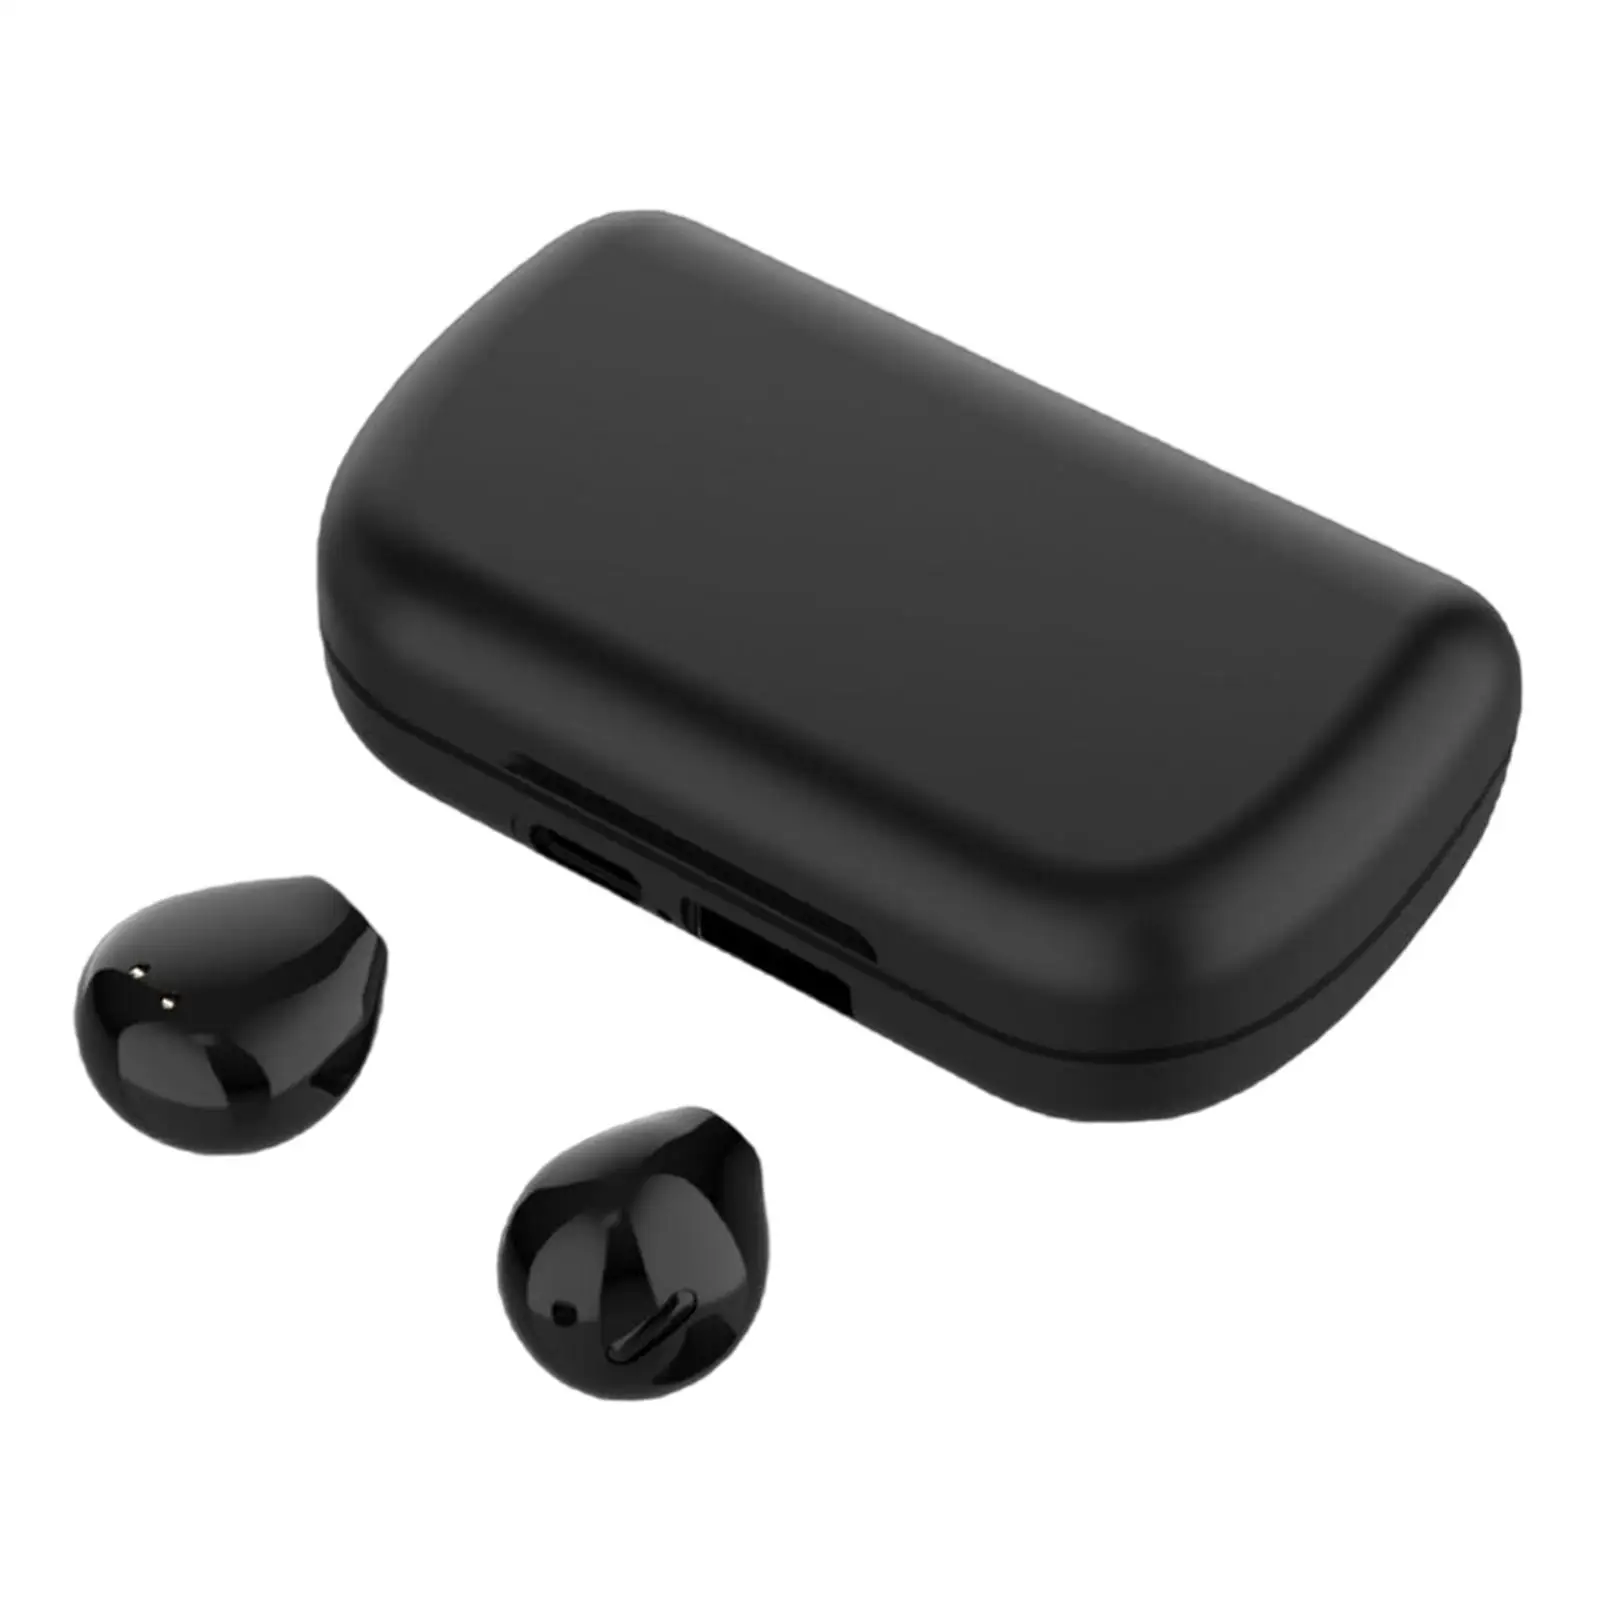  earplugs with Charging Case Sports Earphones for Gaming Business PC